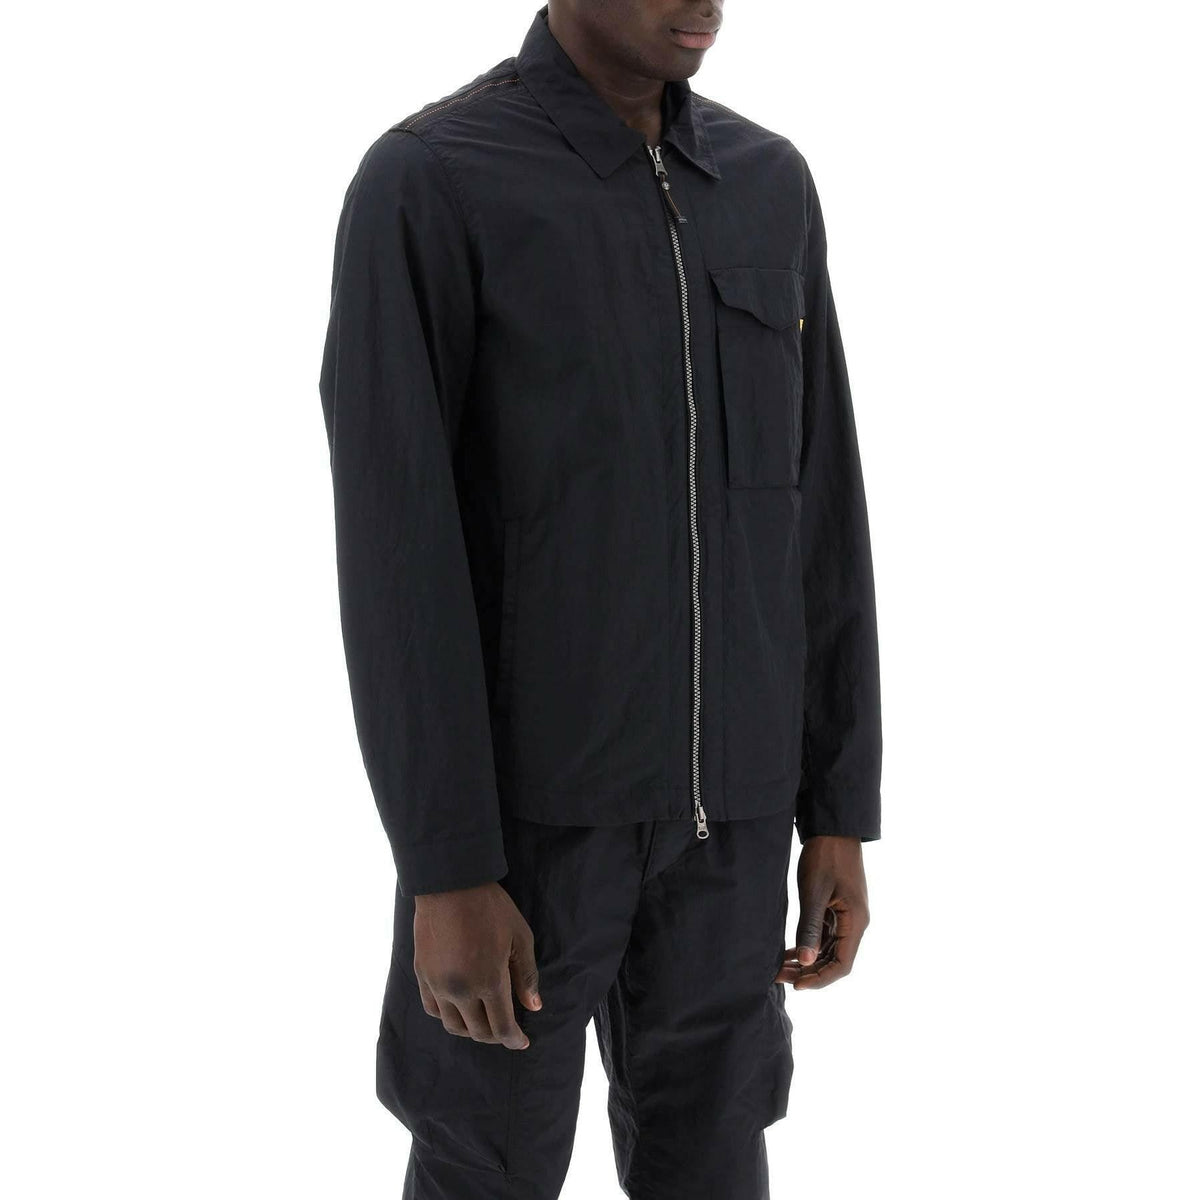 PARAJUMPERS - Black Recycled Nylon-Blend and Better Initiative Cotton Rayner Jacket - JOHN JULIA